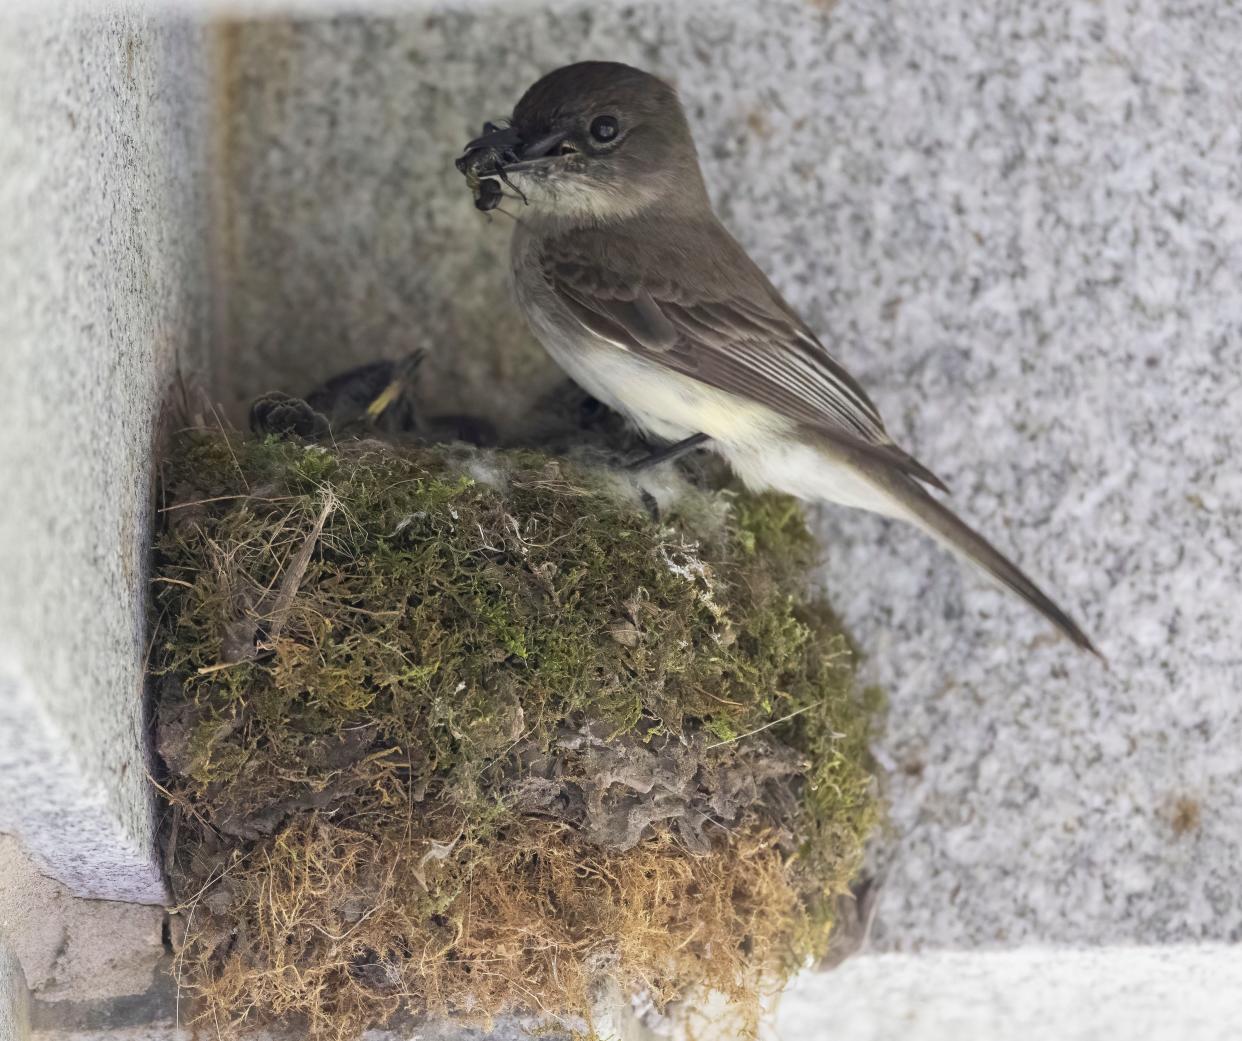 An Eastern Phoebe brings food to the brood at its nest on the Howald mausoleum.